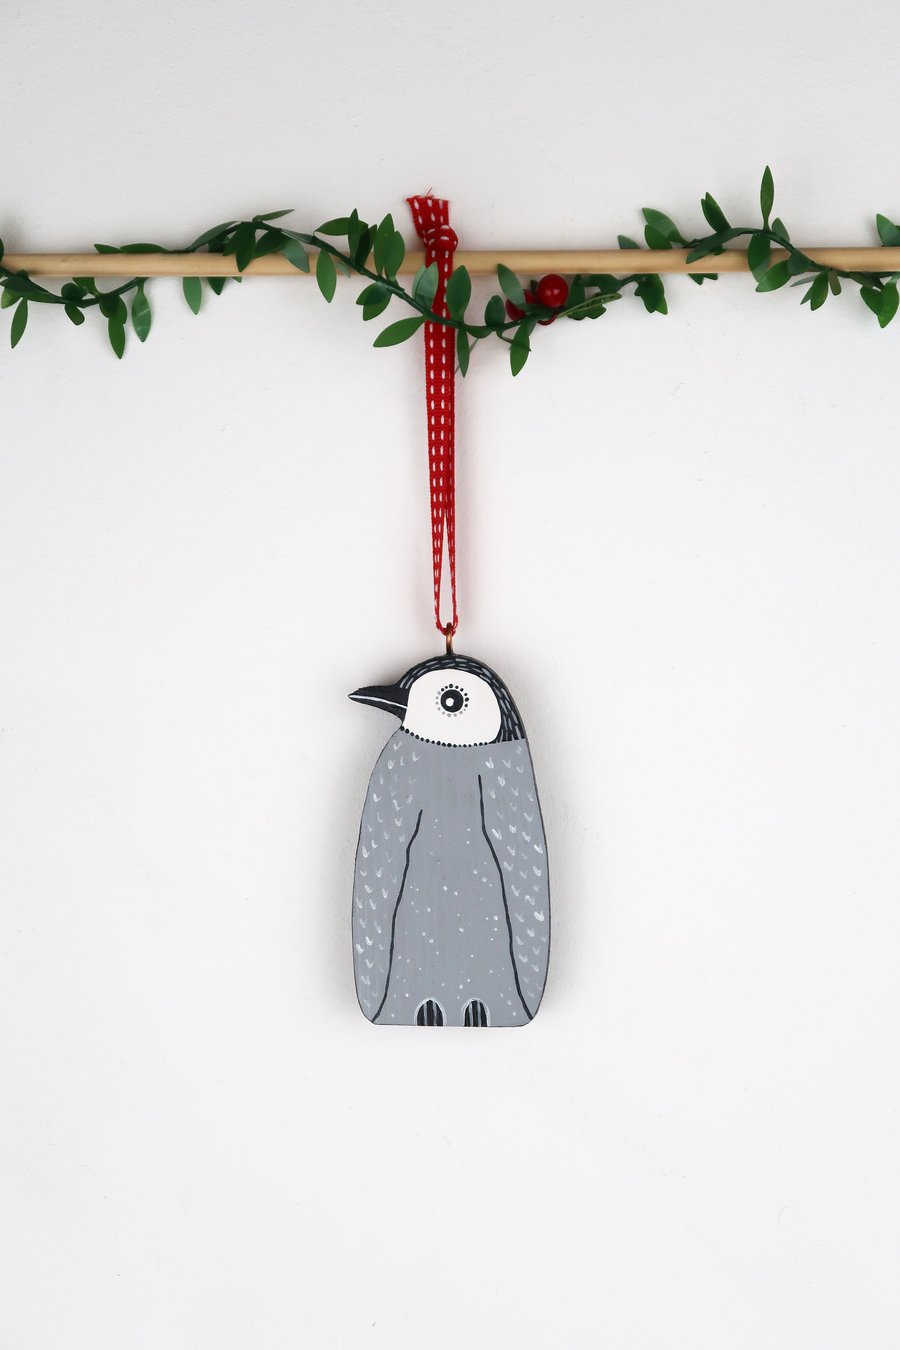 Penguin hanging decoration, cute wooden animal home decor